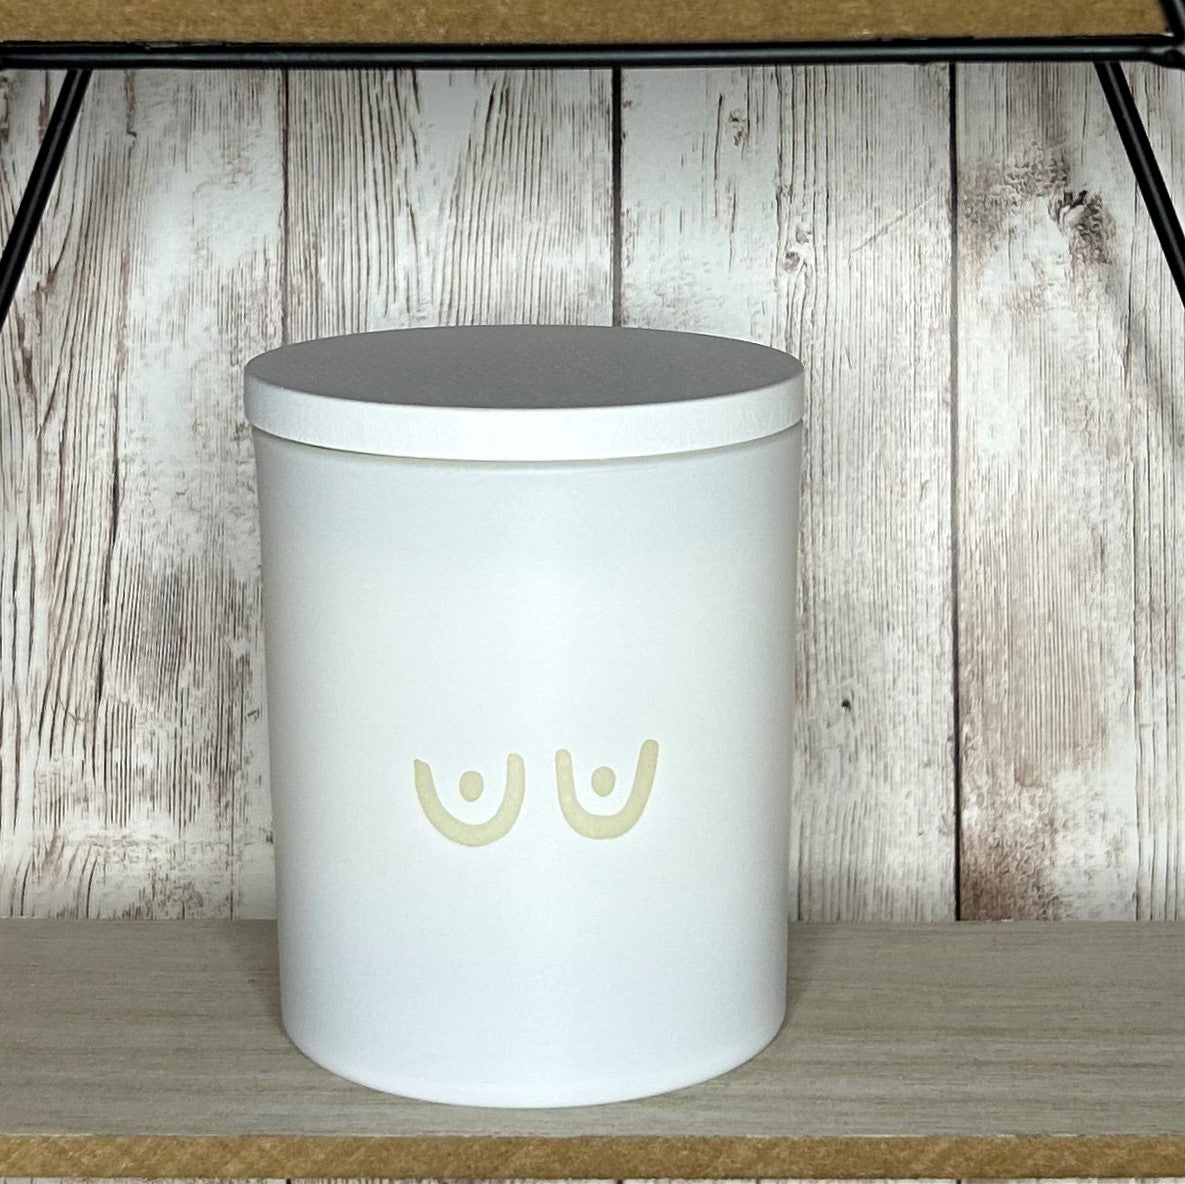 200g Container Candle - Zen (last few remaining)